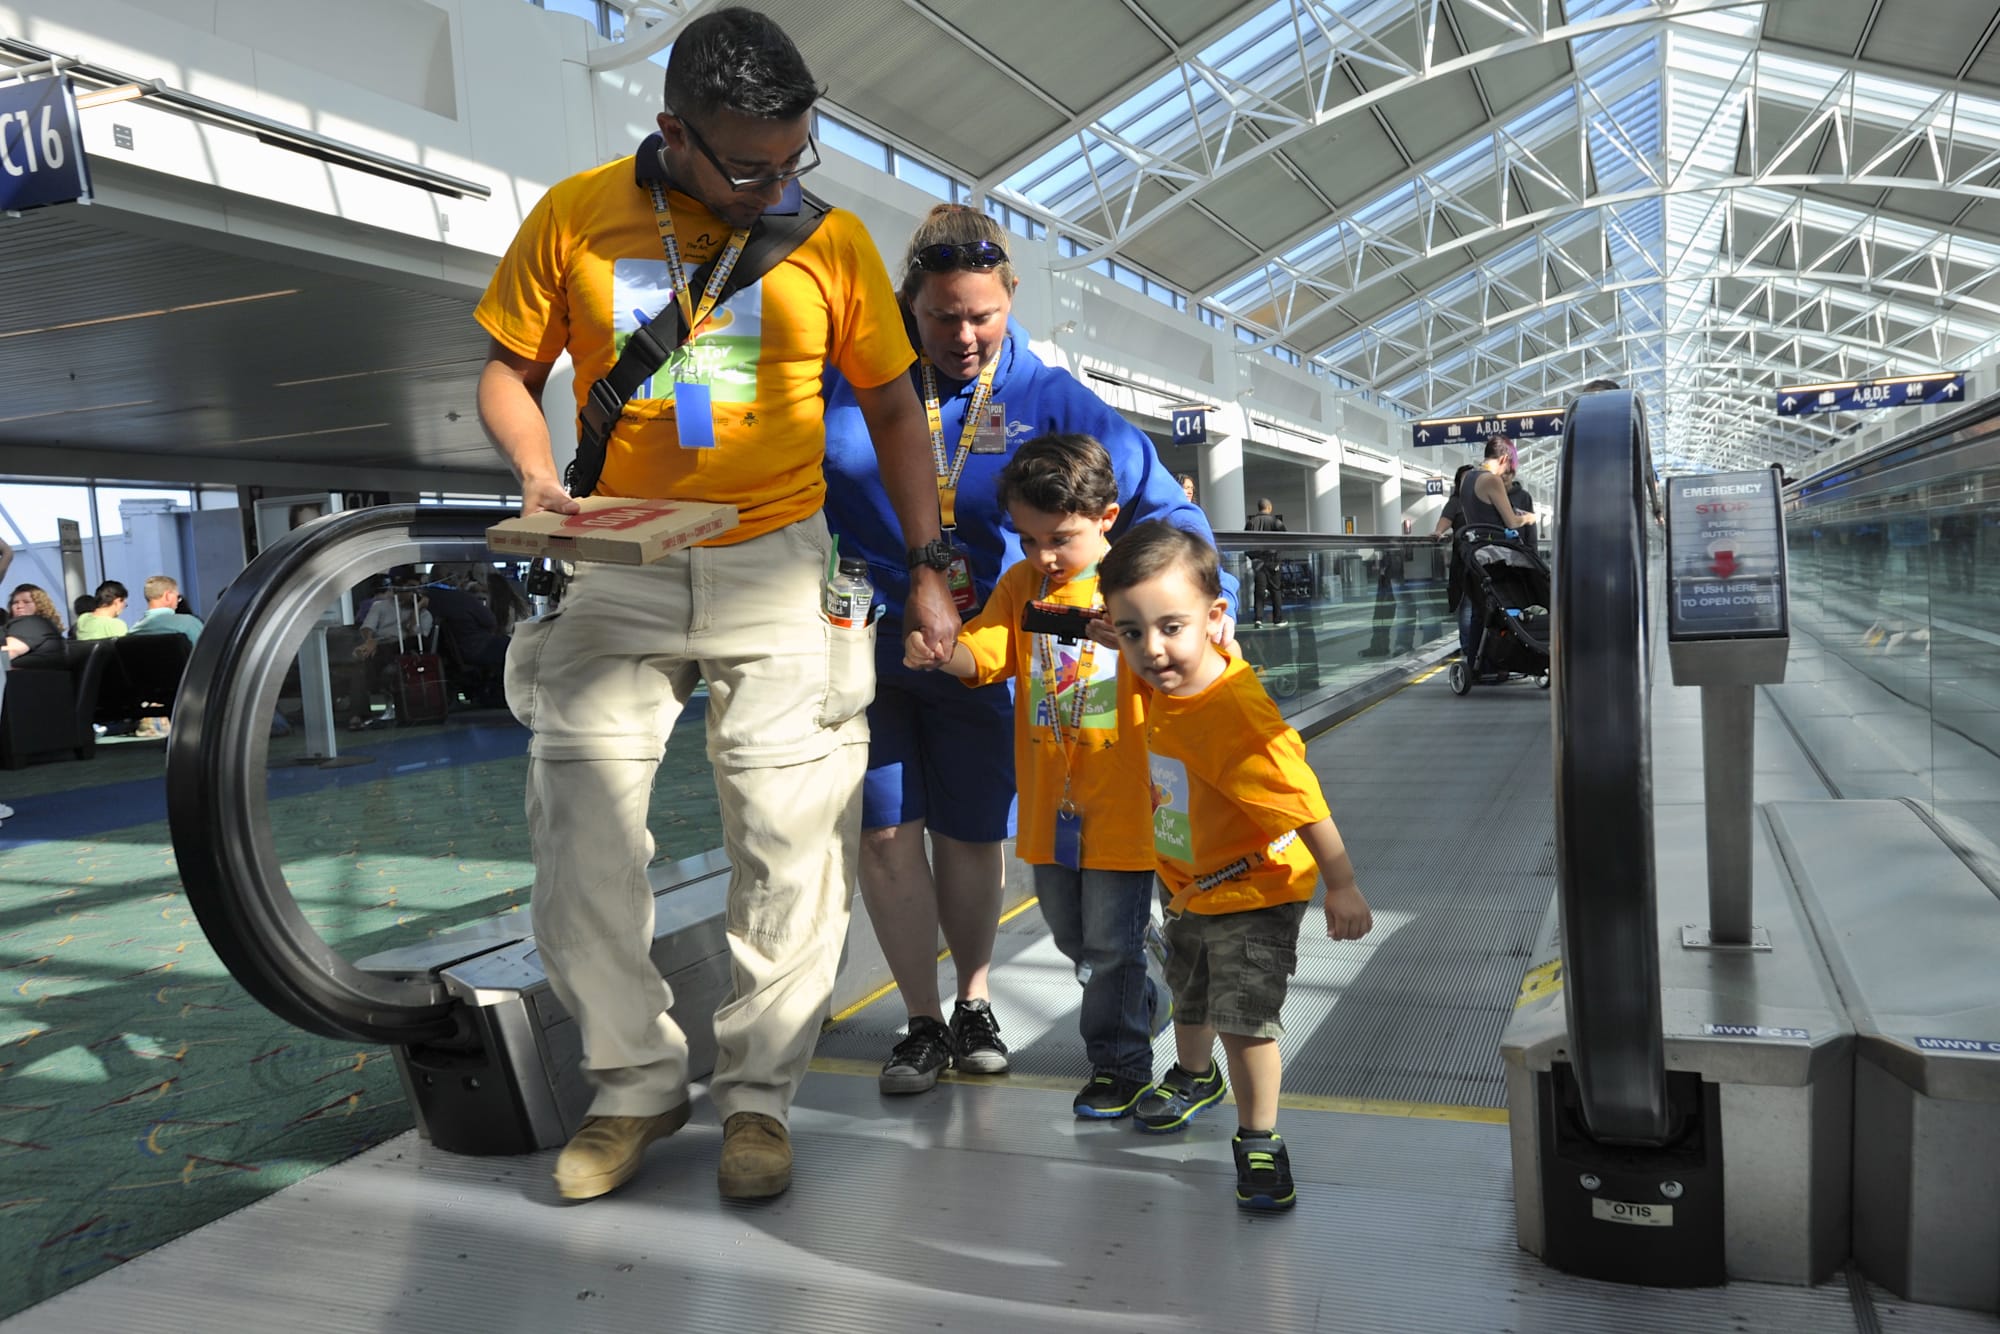 Saul Martinez Class, left, assists Owen Martinez with Catharine Hunter and Joshua Martinez, right, on the moving walkway at PDX at an event where families with children with autism could practice boarding a plane.